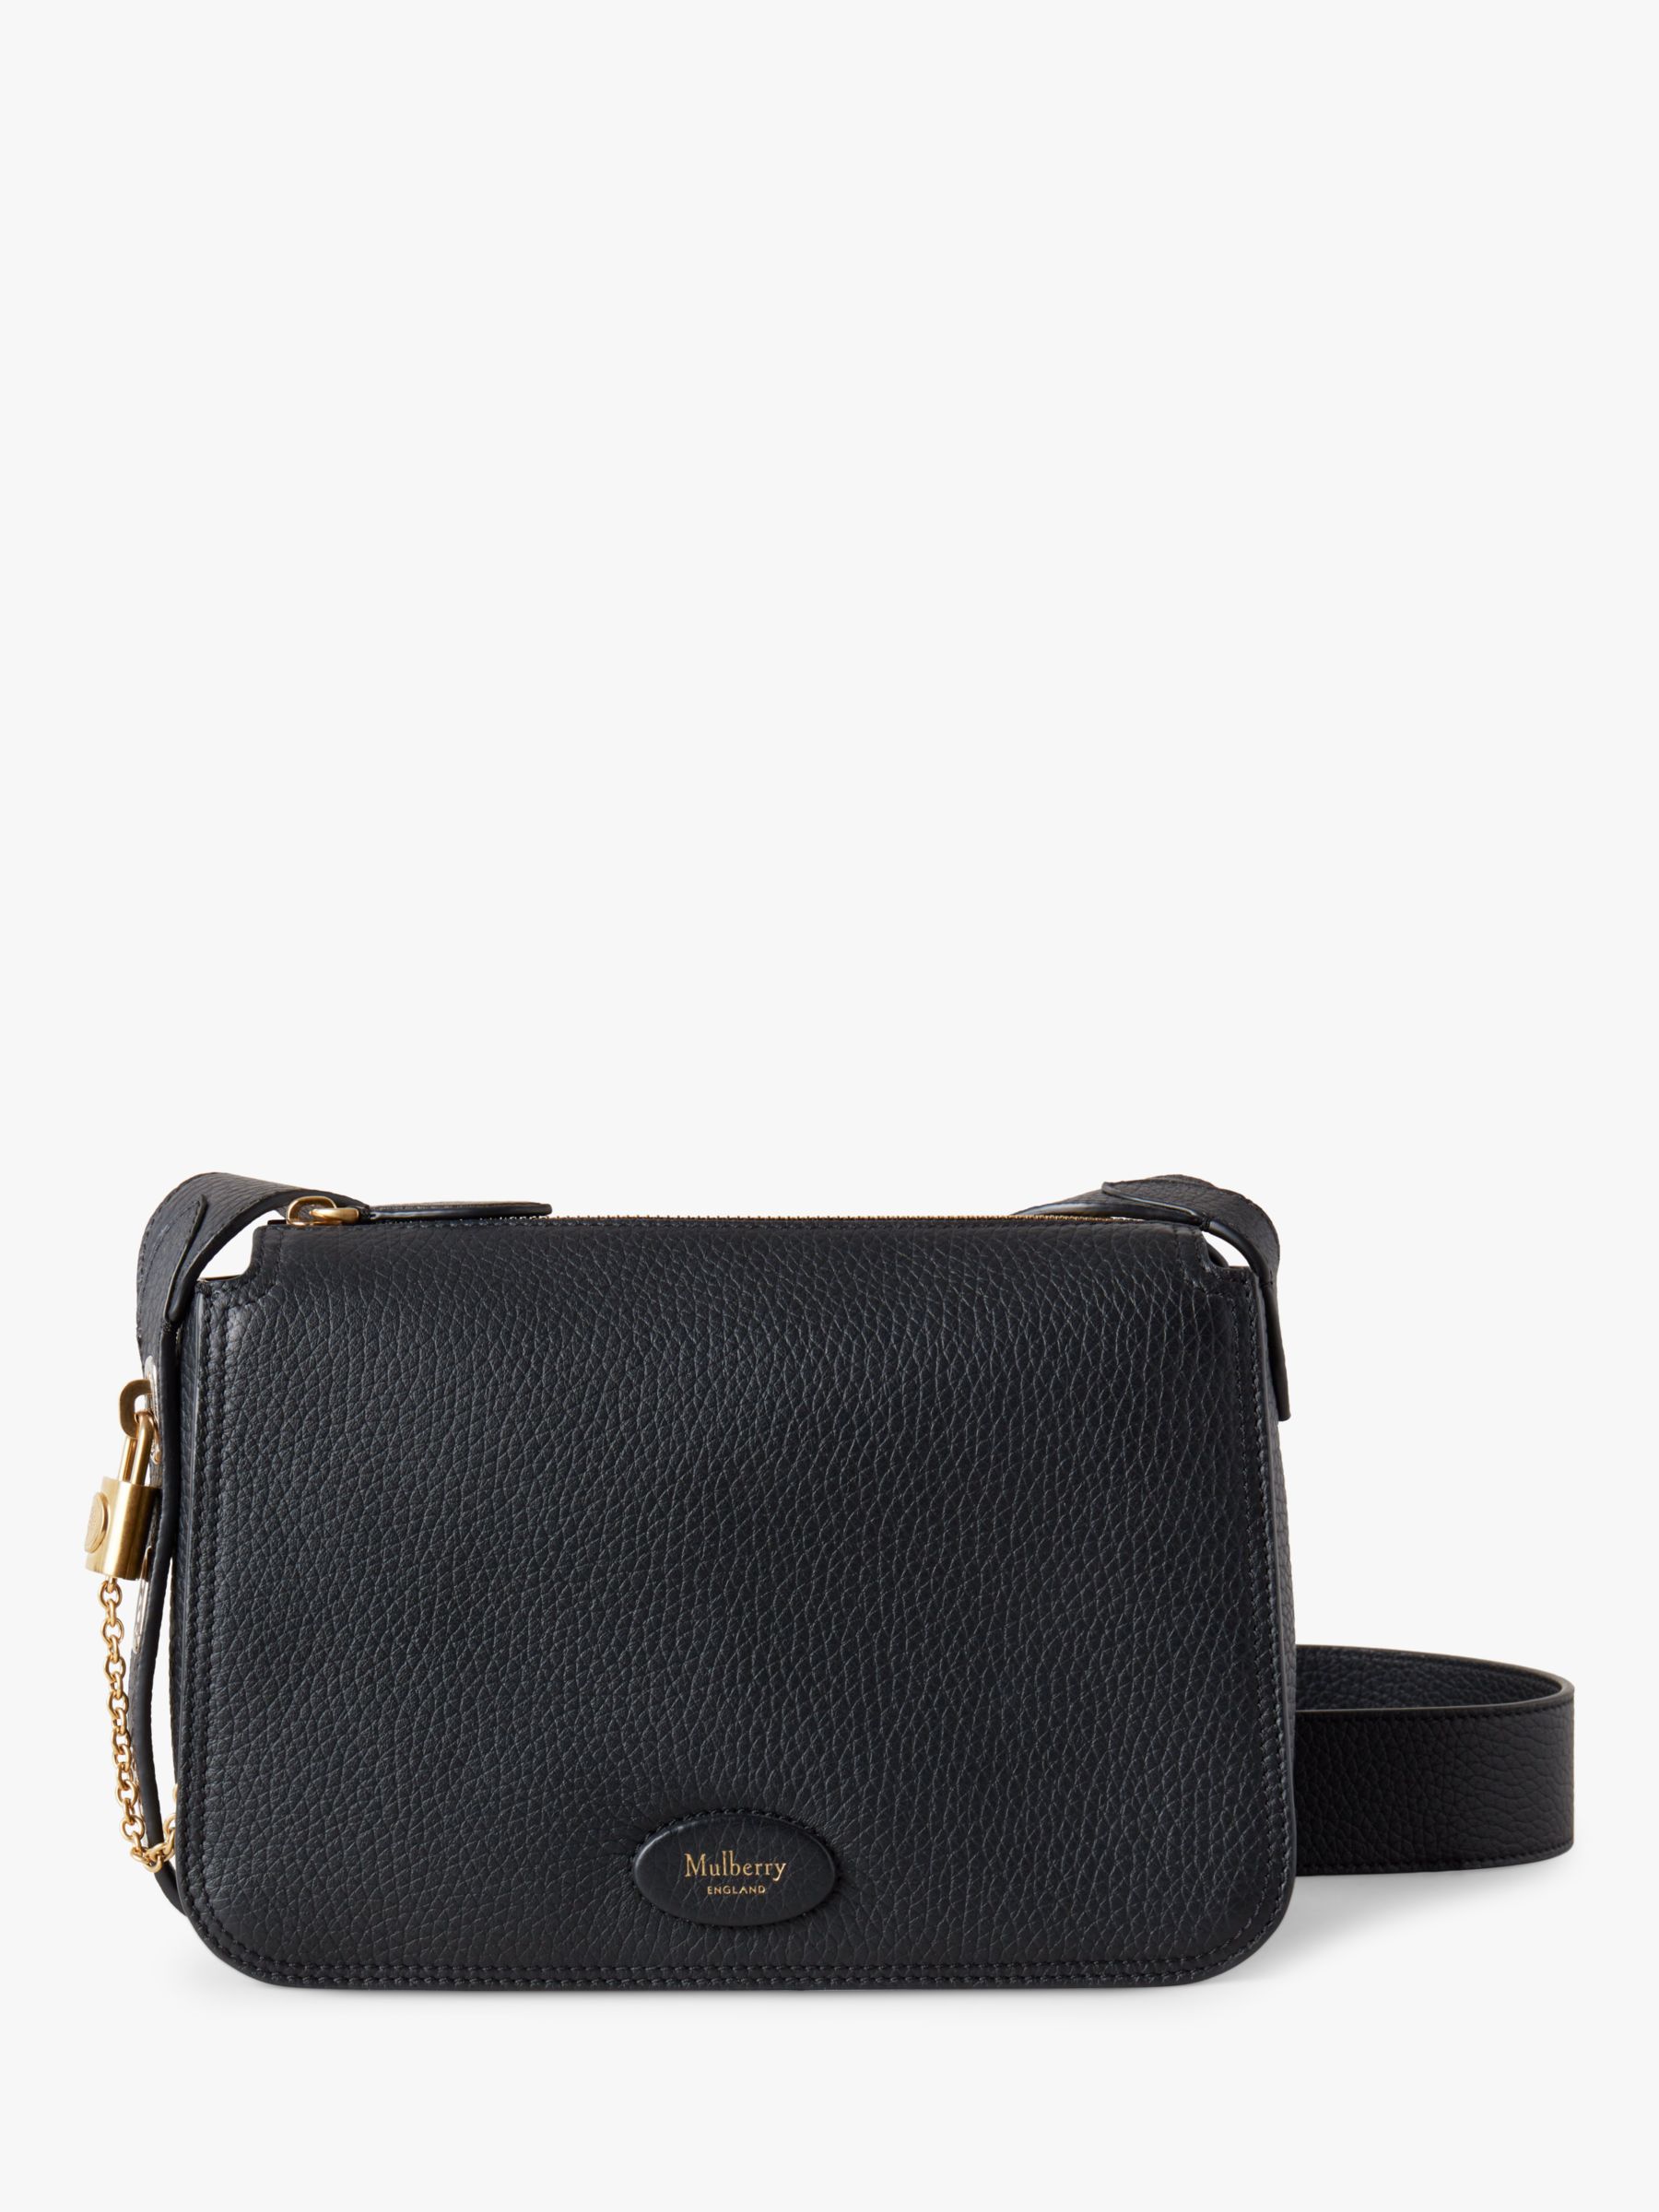 Leather crossbody bag Mulberry Black in Leather - 31089689